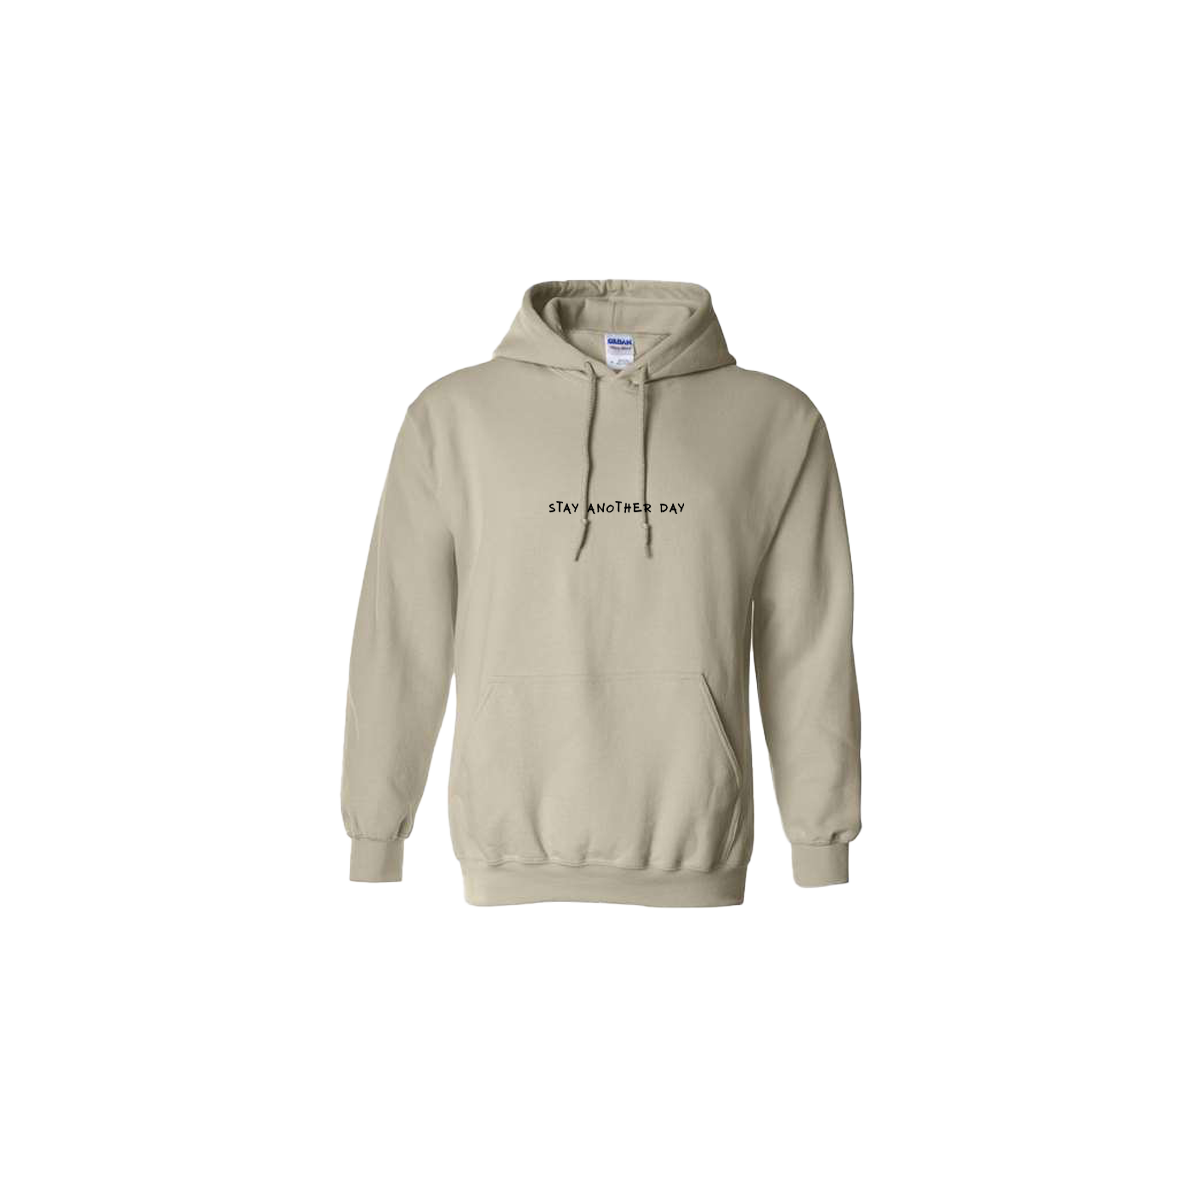 Stay Another Day Text Embroidered Beige Hoodie - Mental Health Awareness Clothing